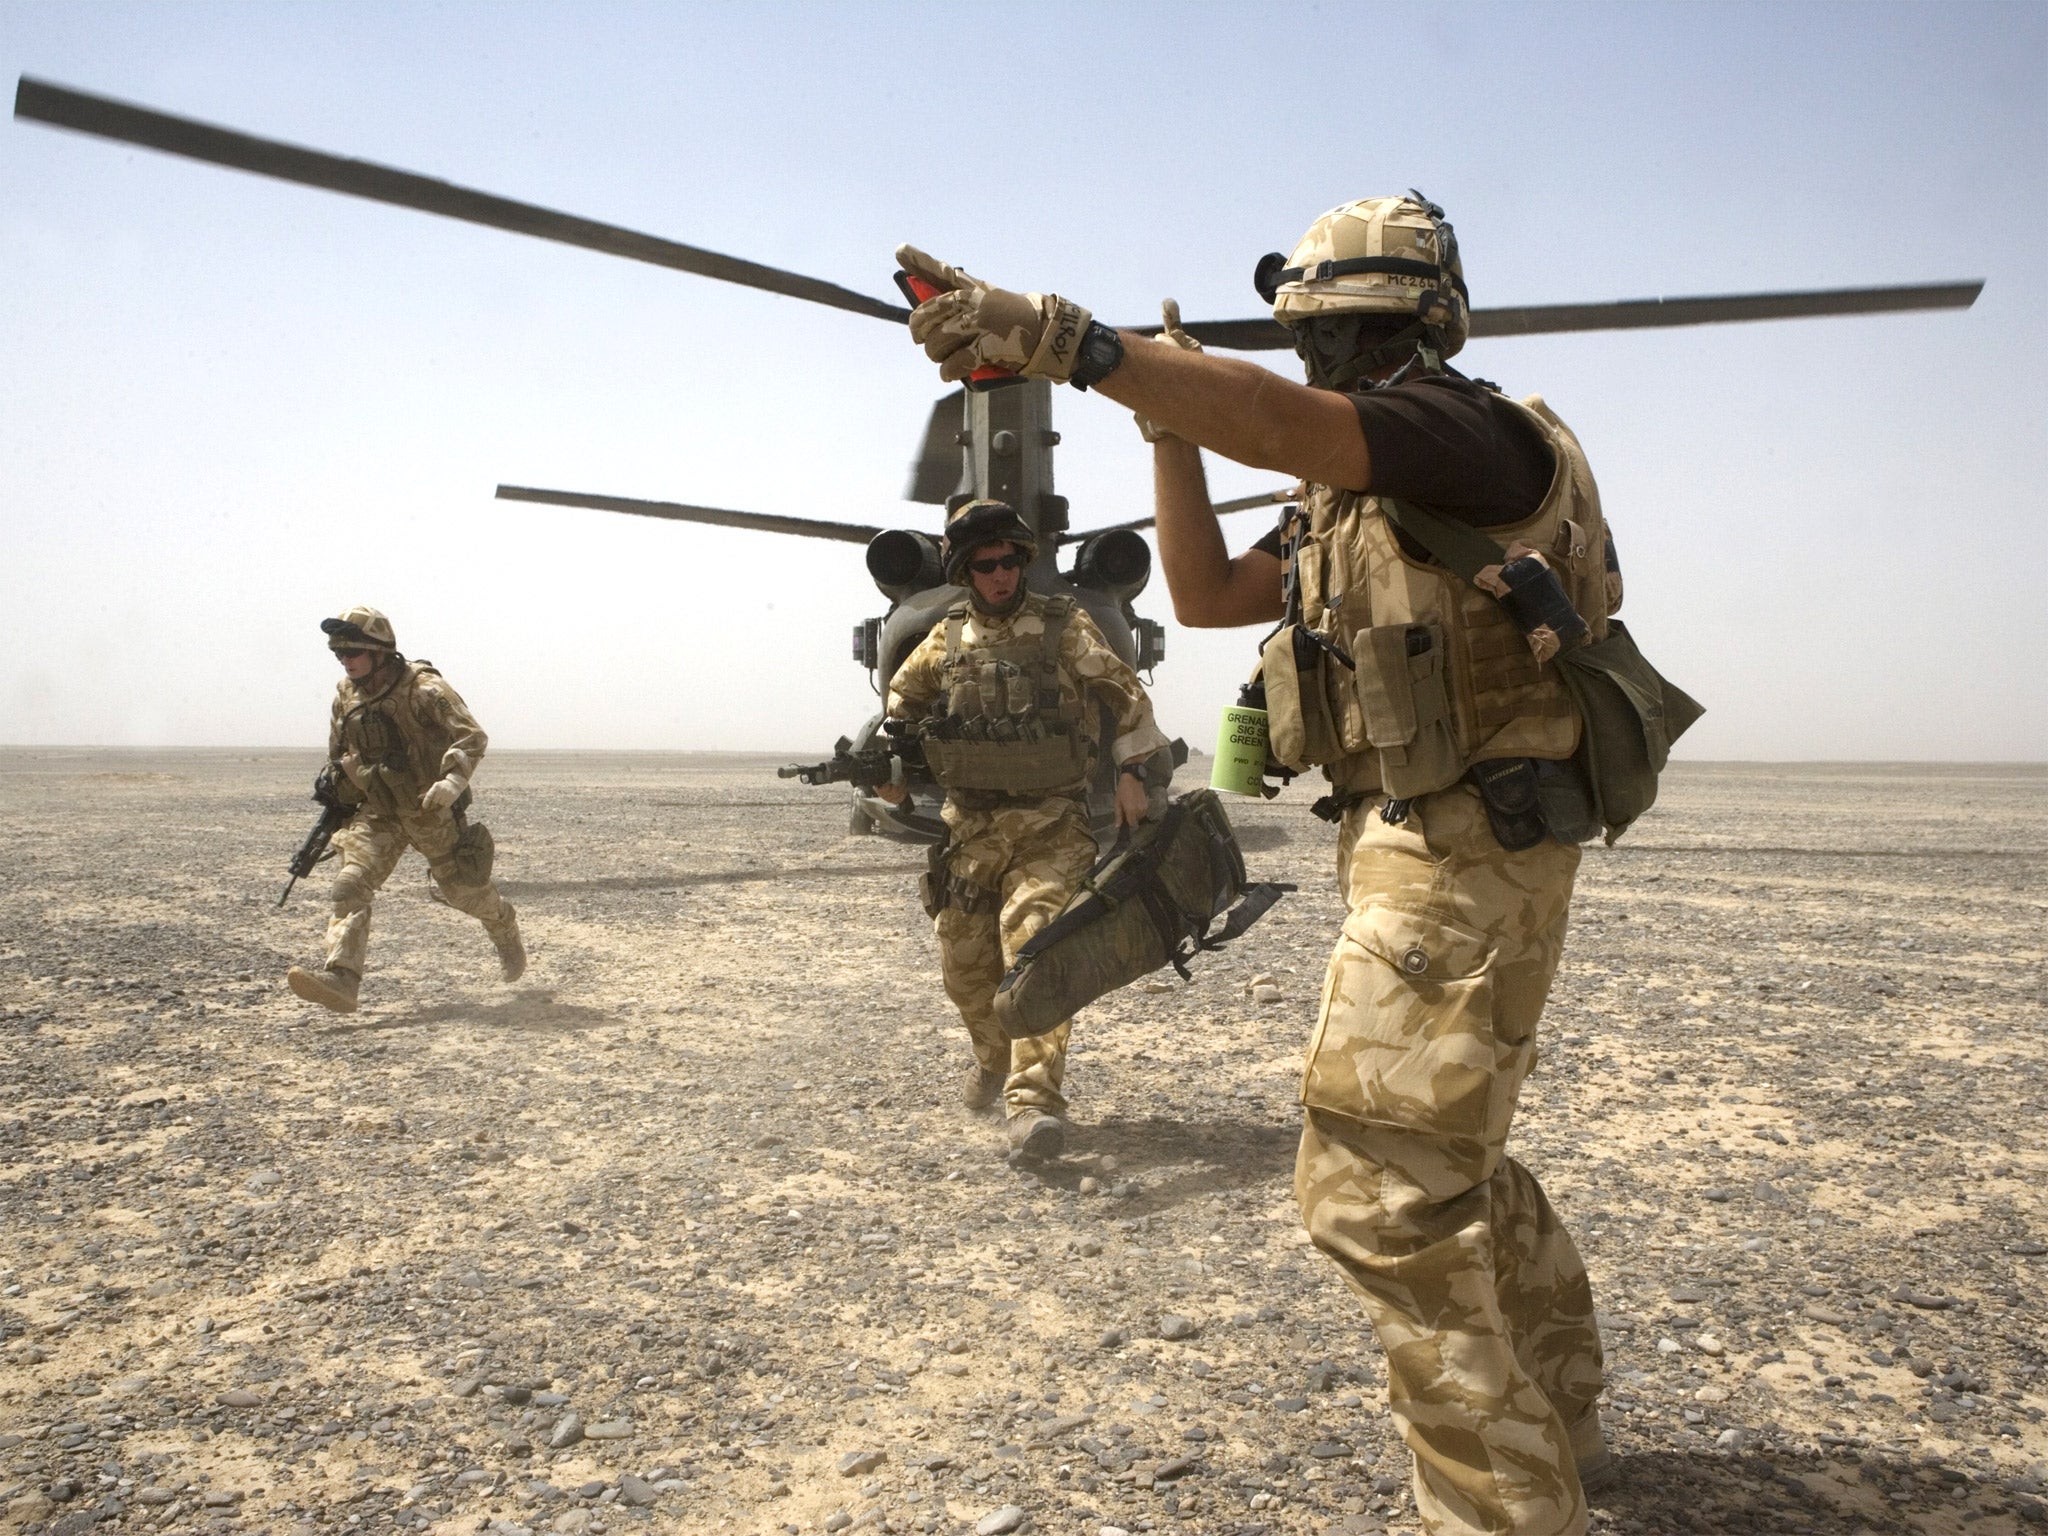 British Soldiers are deployed from Chinook helicopters in the desert, Garmsir District, Southern Helmand Province